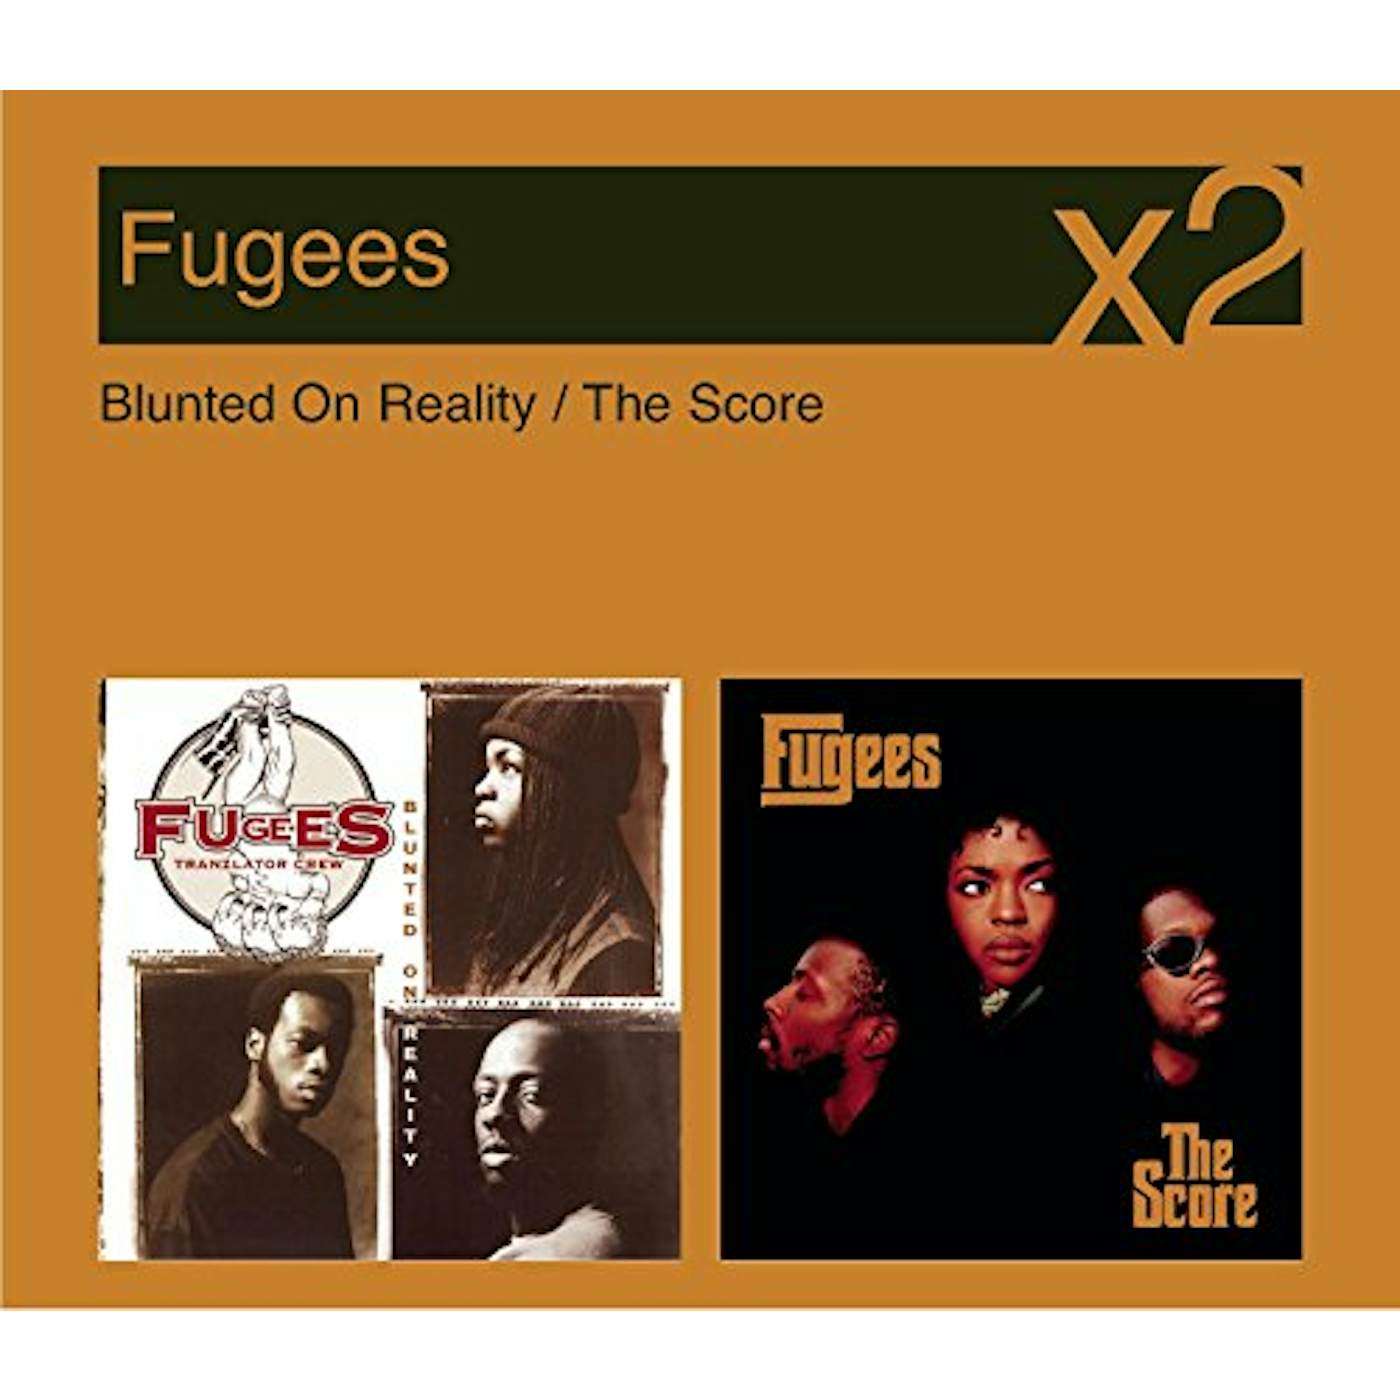 Fugees BLUNTED ON REALITY / SCORE CD